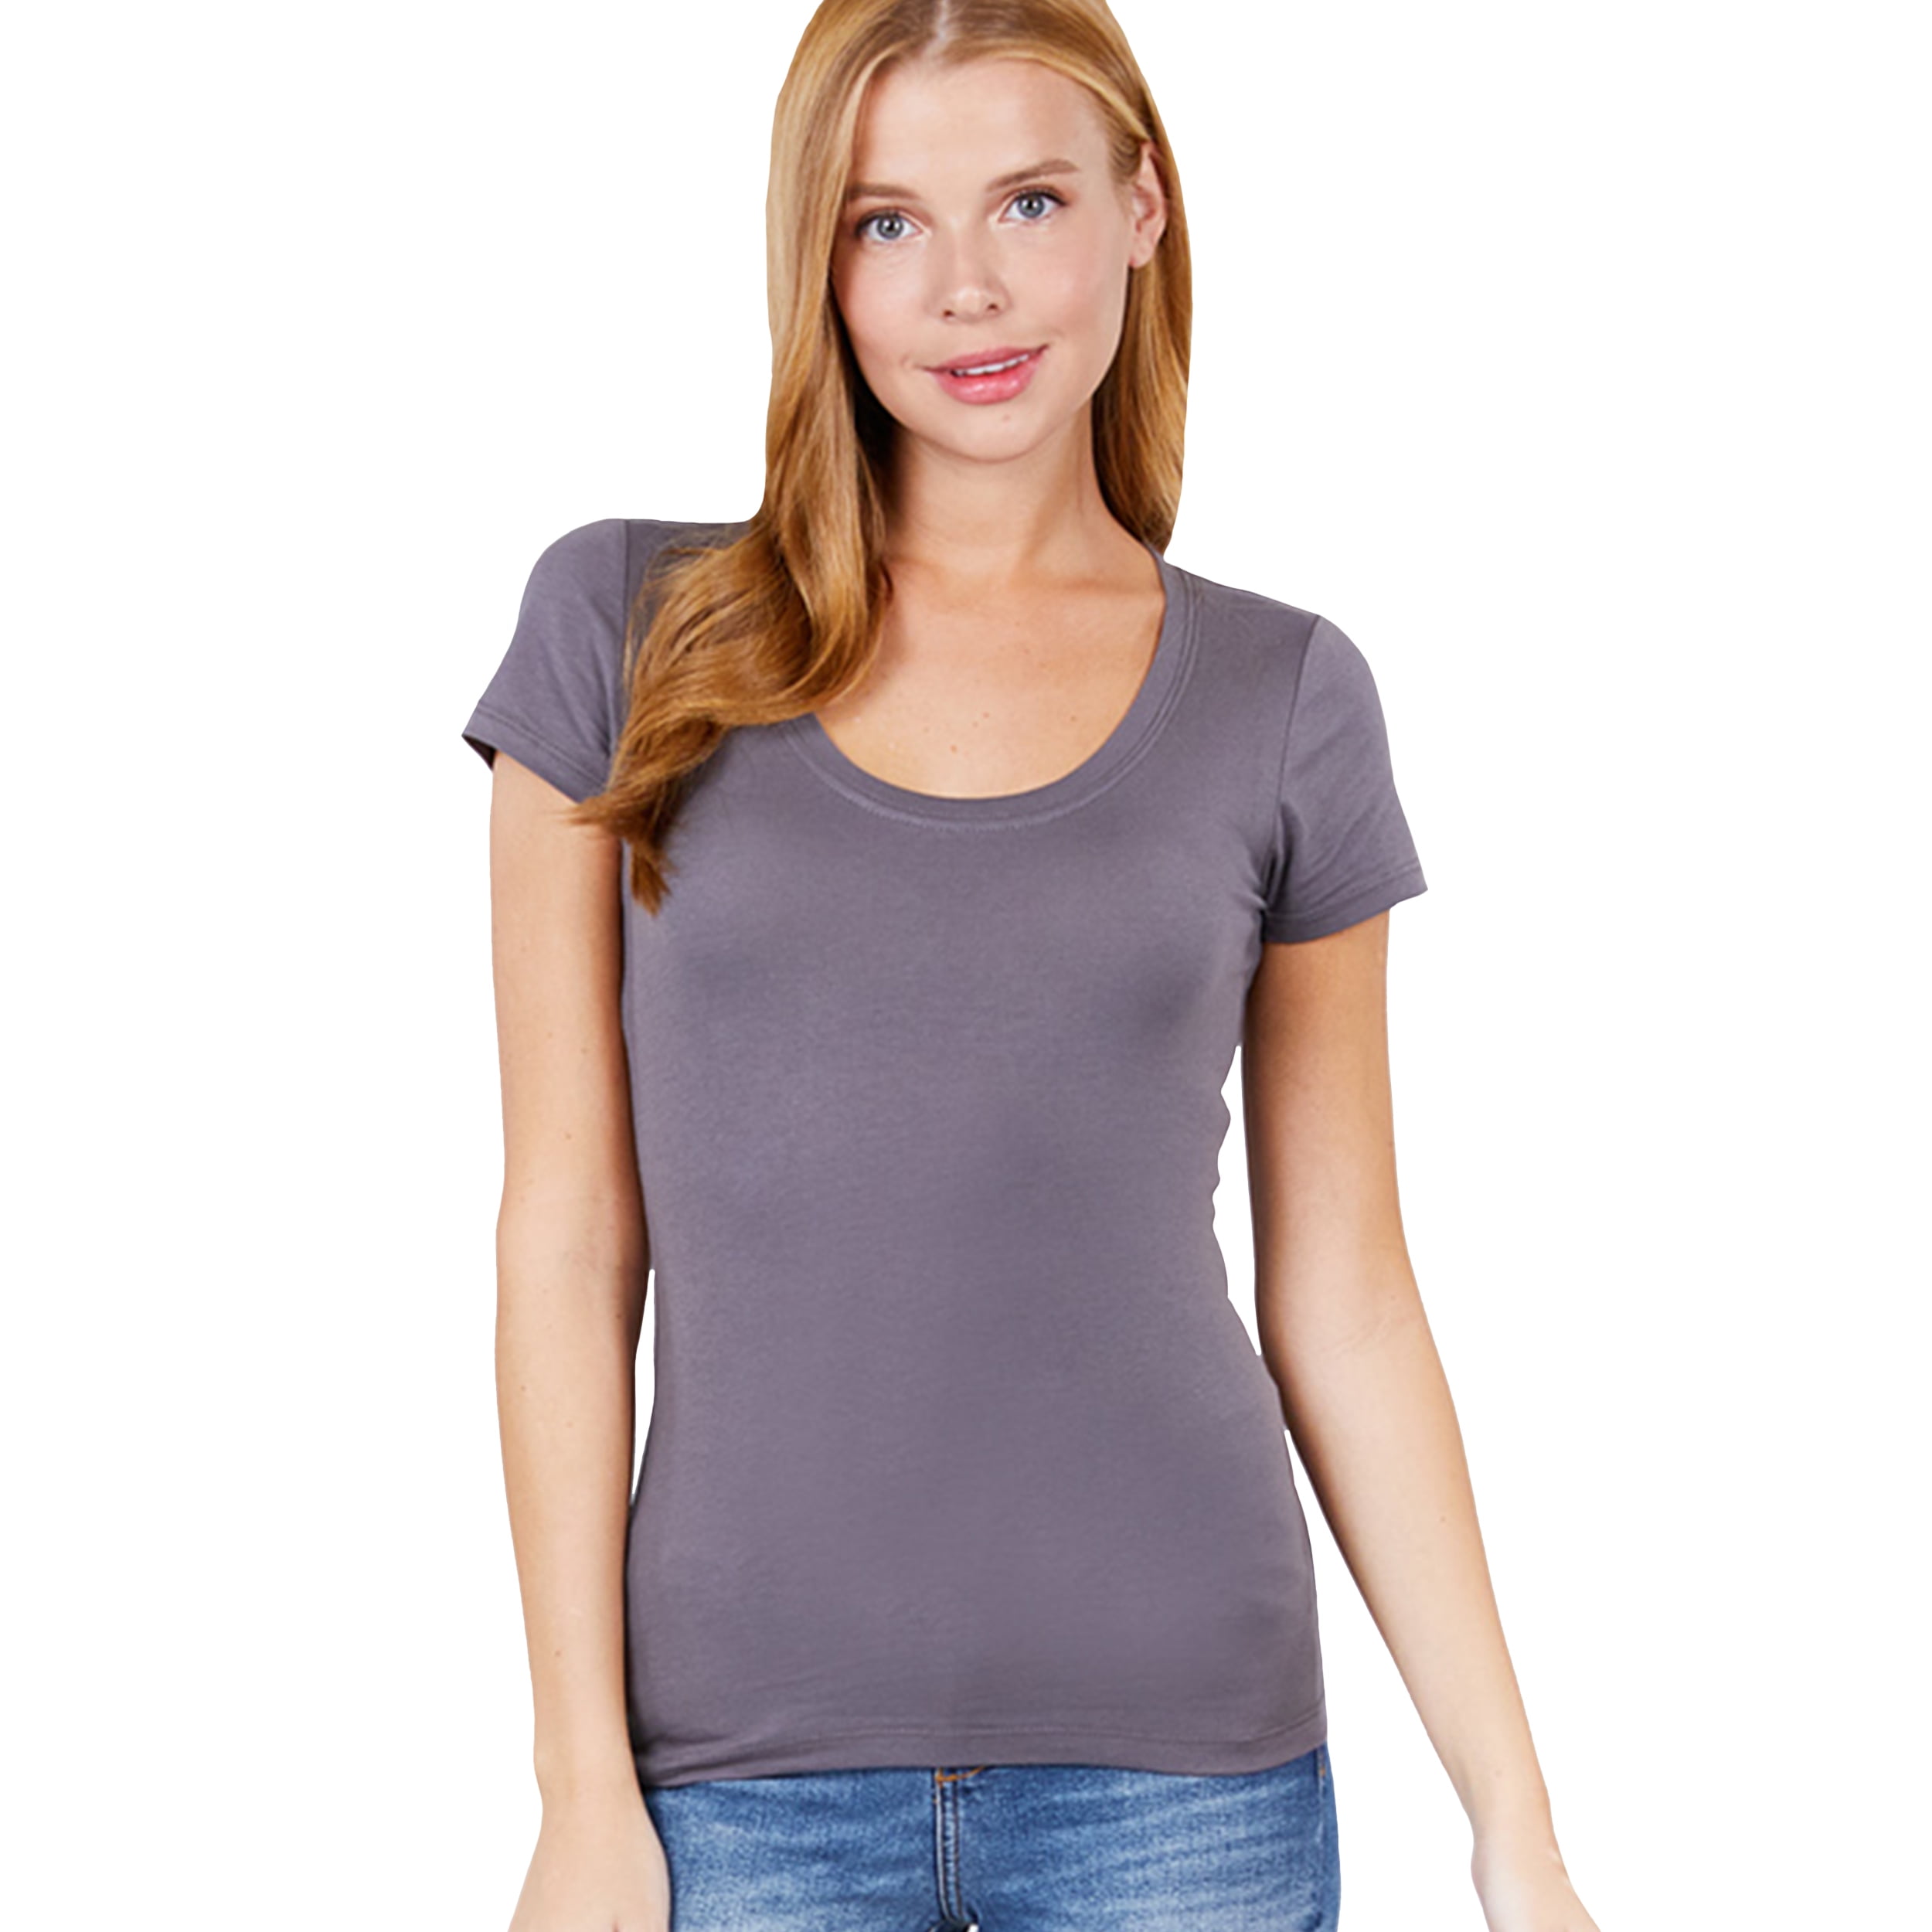 SNJ - Women's Solid Cotton Top Tee Basic Scoop Neck Short Sleeve Color ...